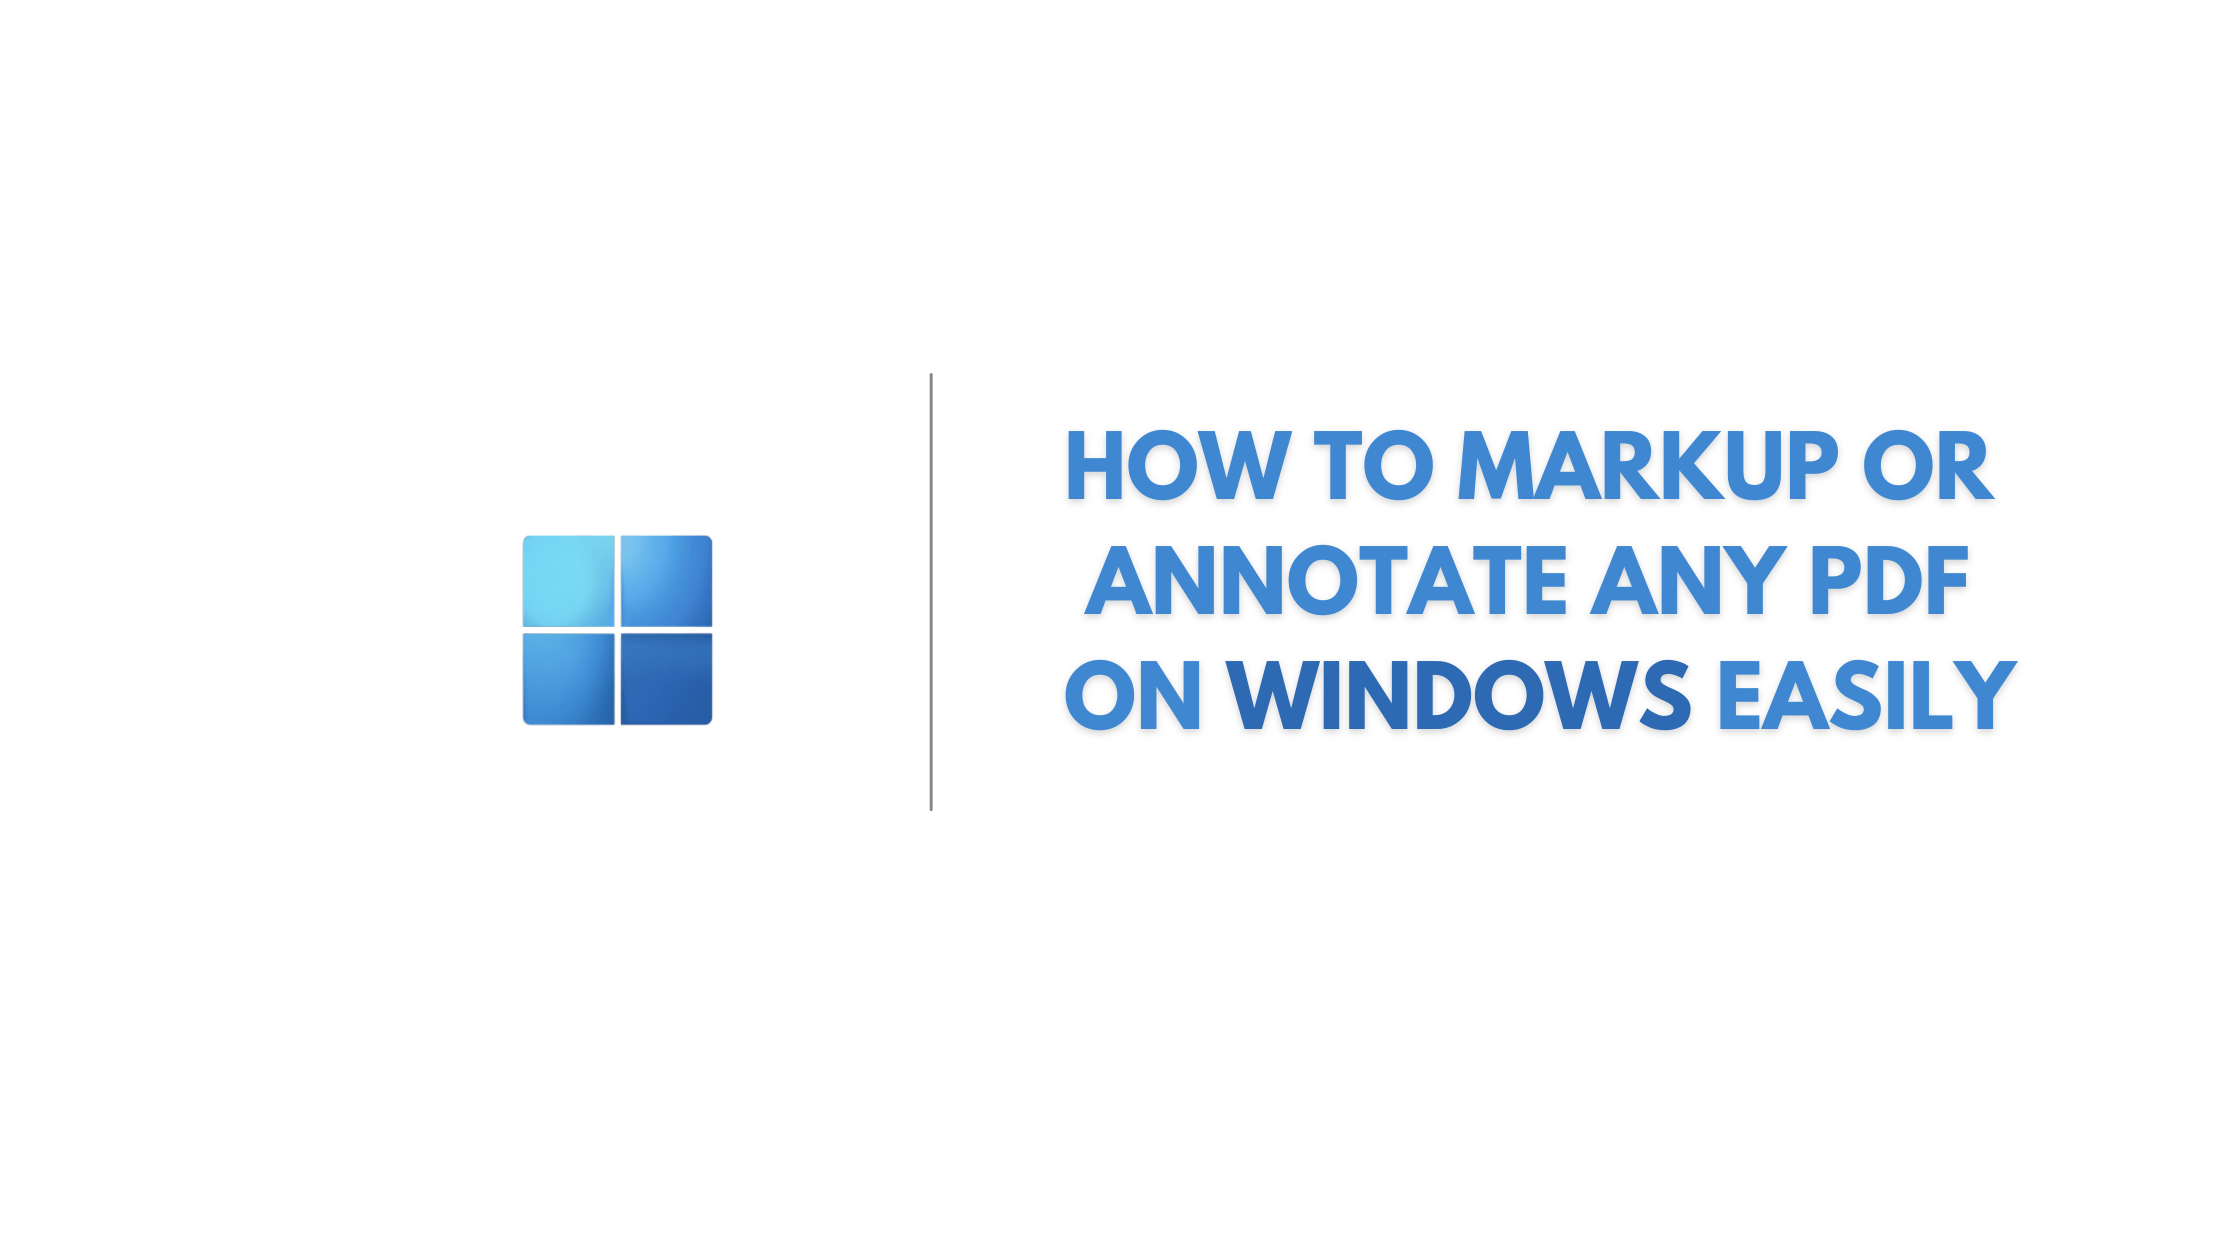 How To Markup Or Annotate Any Pdf On Windows Easily